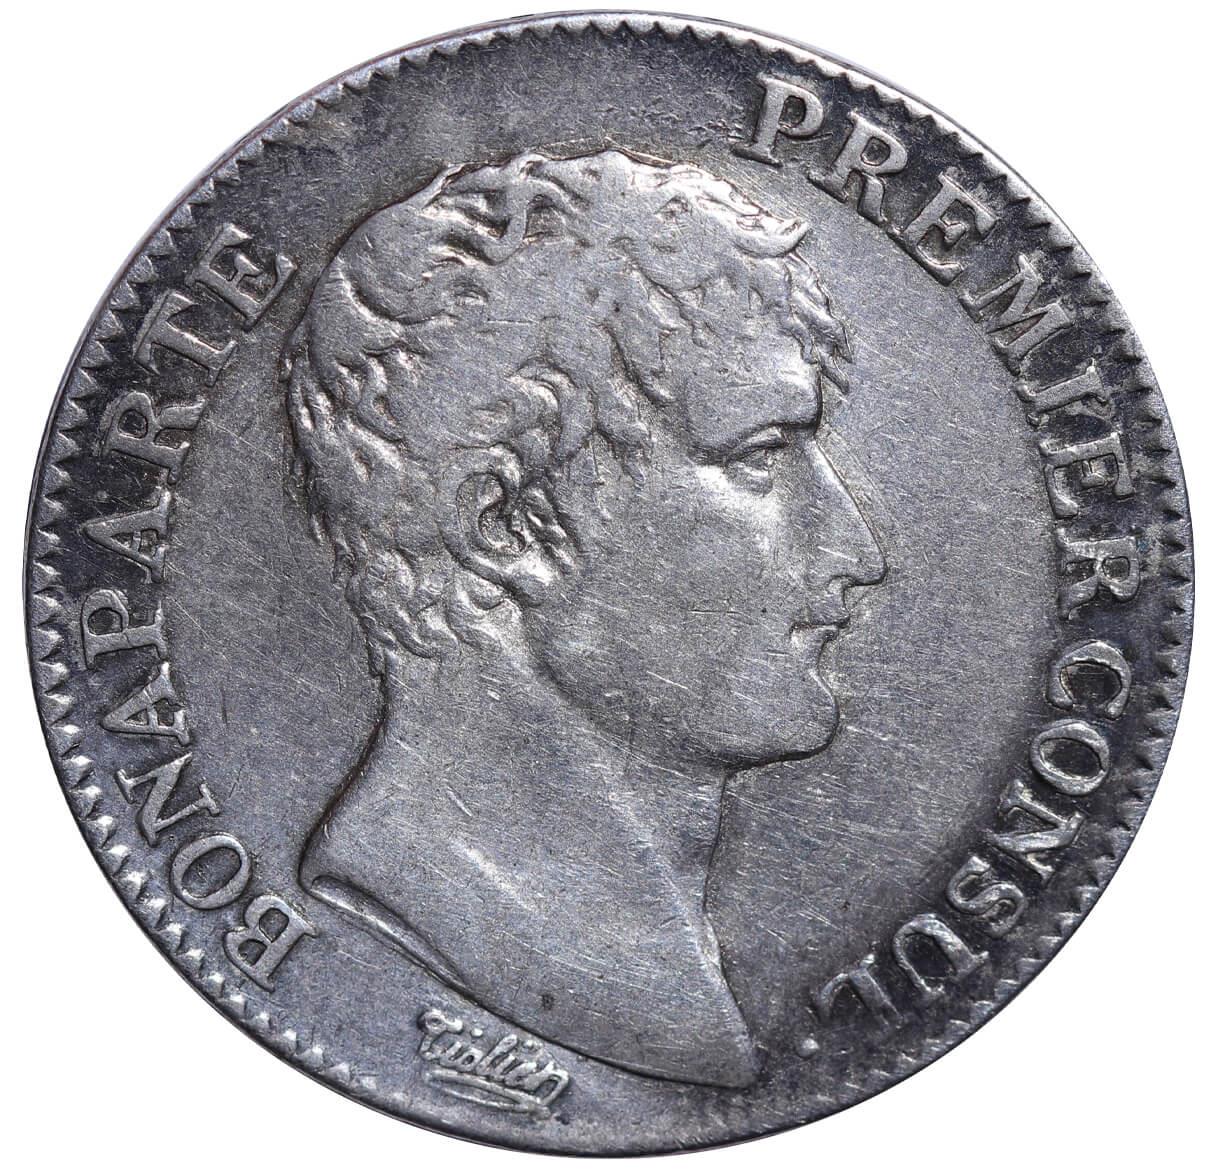 France, 1 Franc, 1802 year, A - Image 3 of 3